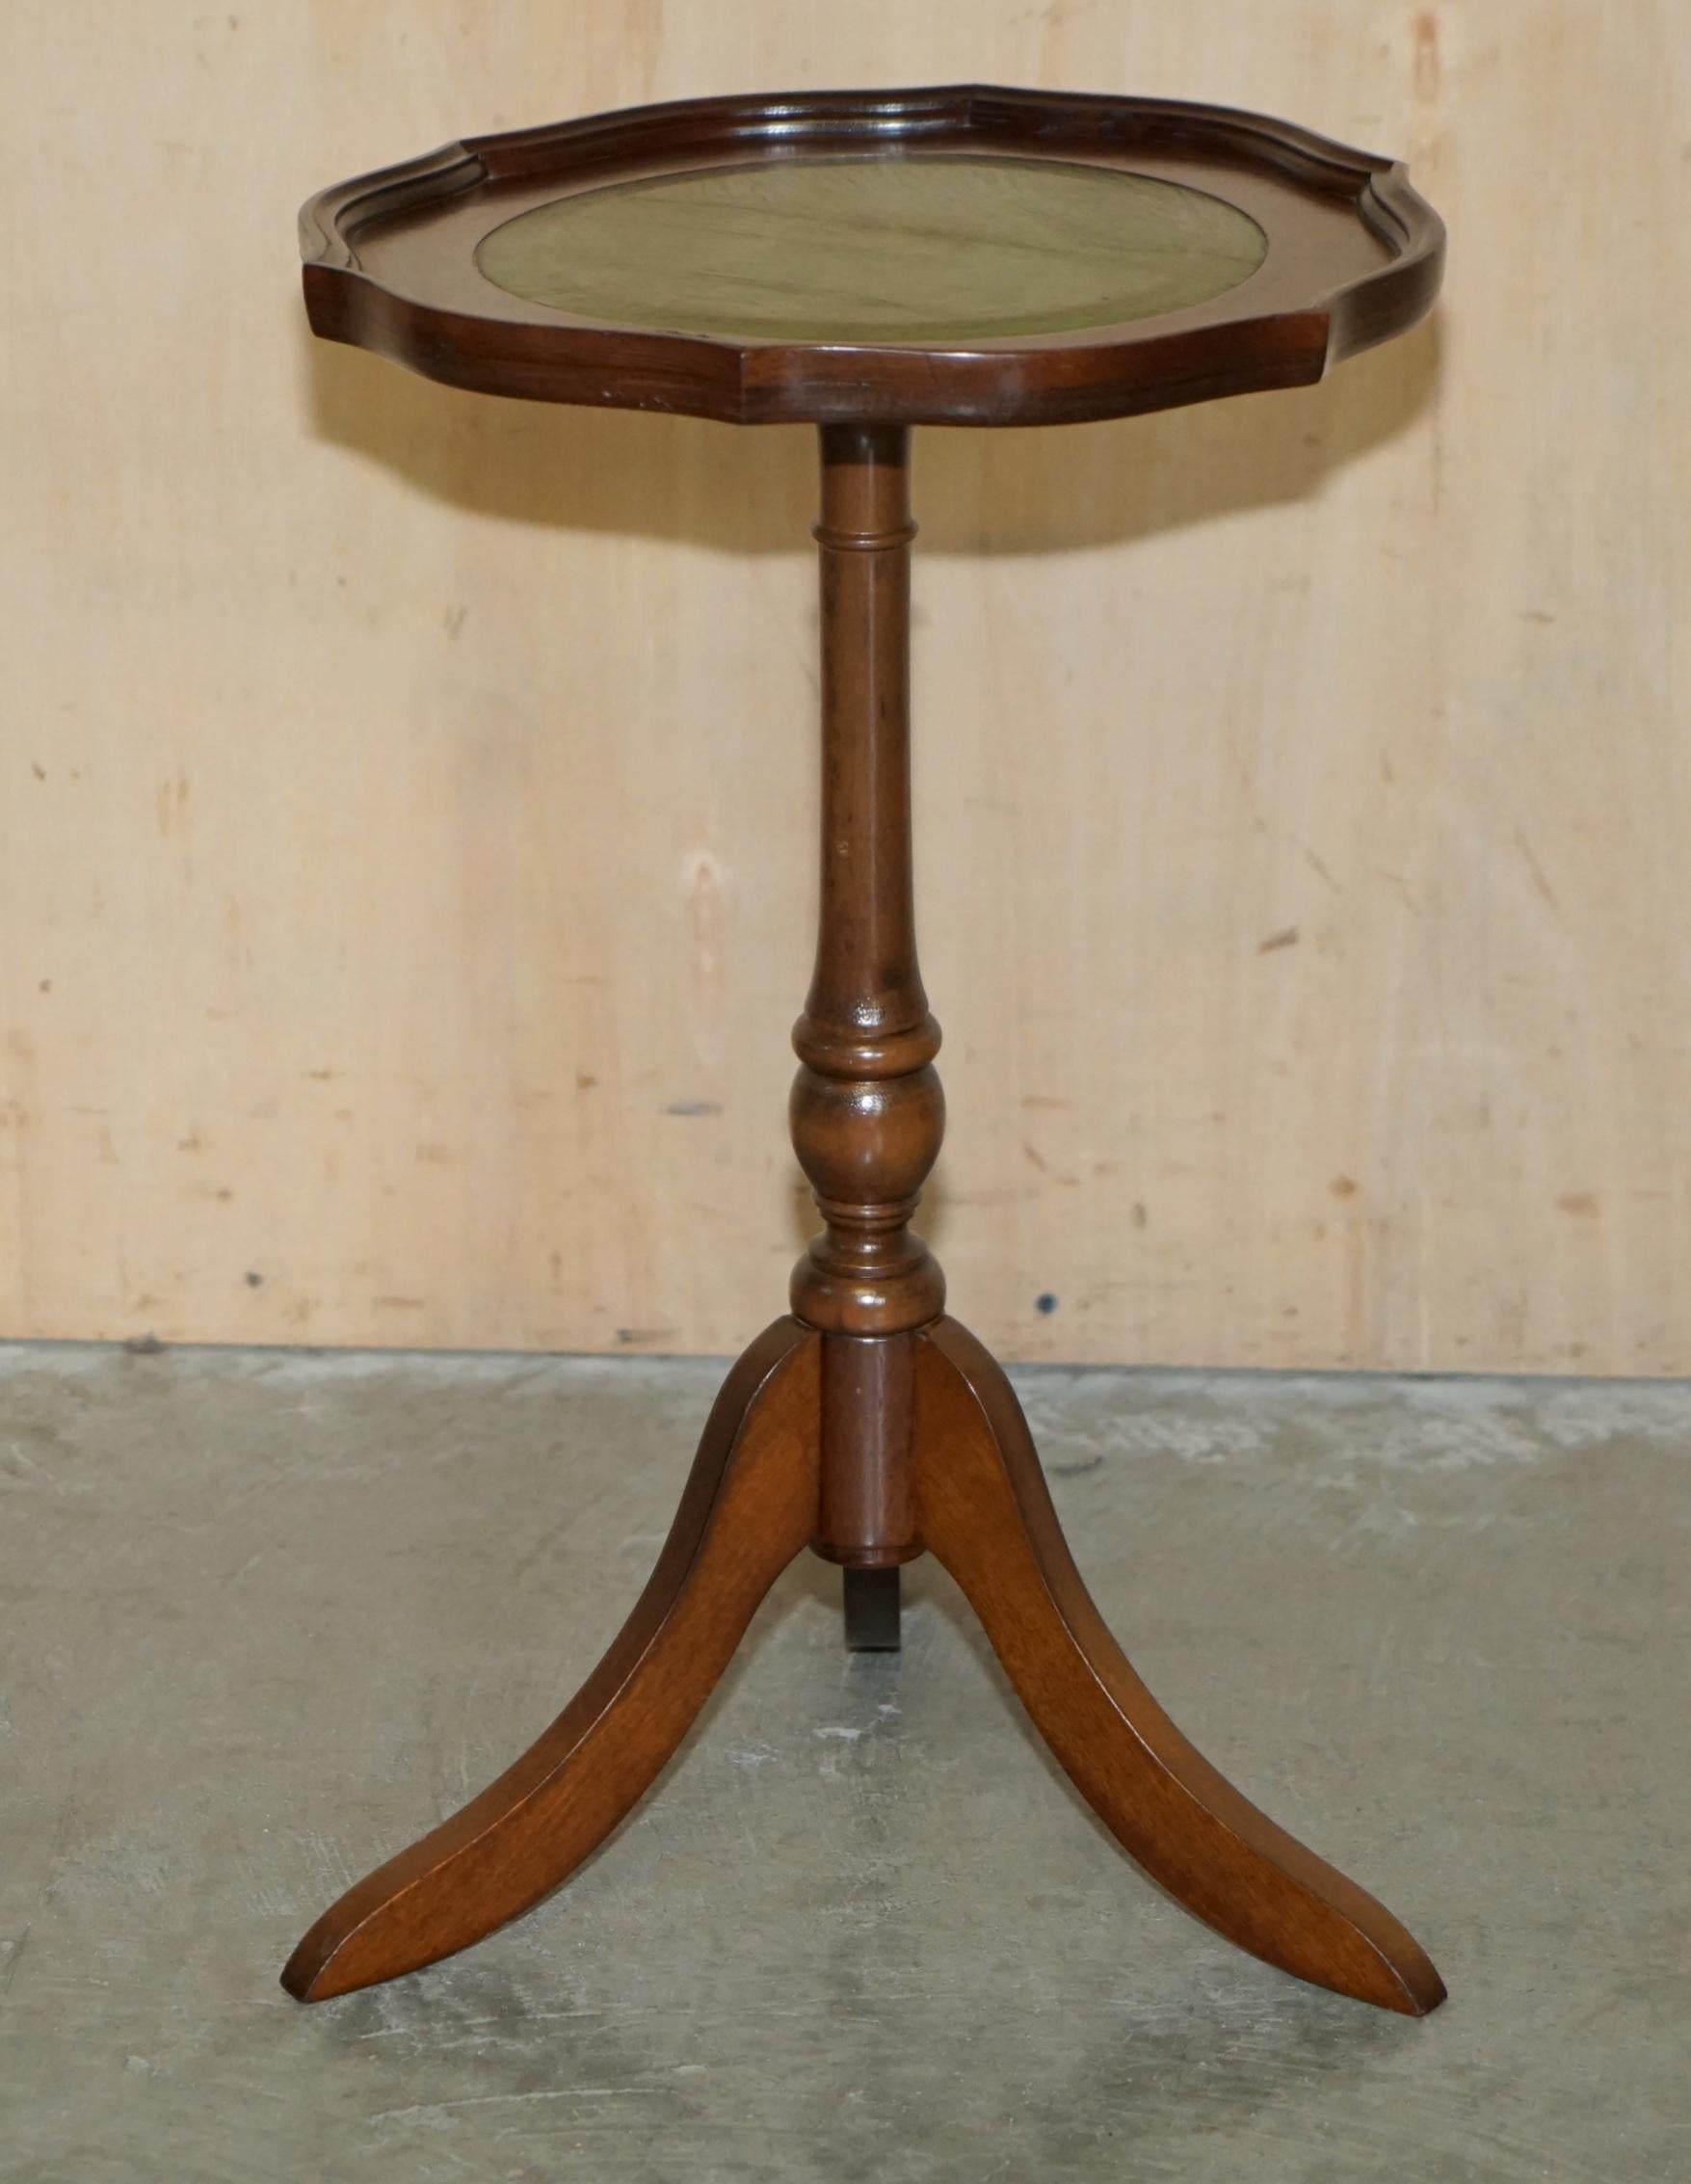 Royal House Antiques

Royal House Antiques is delighted to offer for sale this lovely vintage beech framed end table with pie crust edge and British Racing Green leather top

Please note the delivery fee listed is just a guide, it covers within the